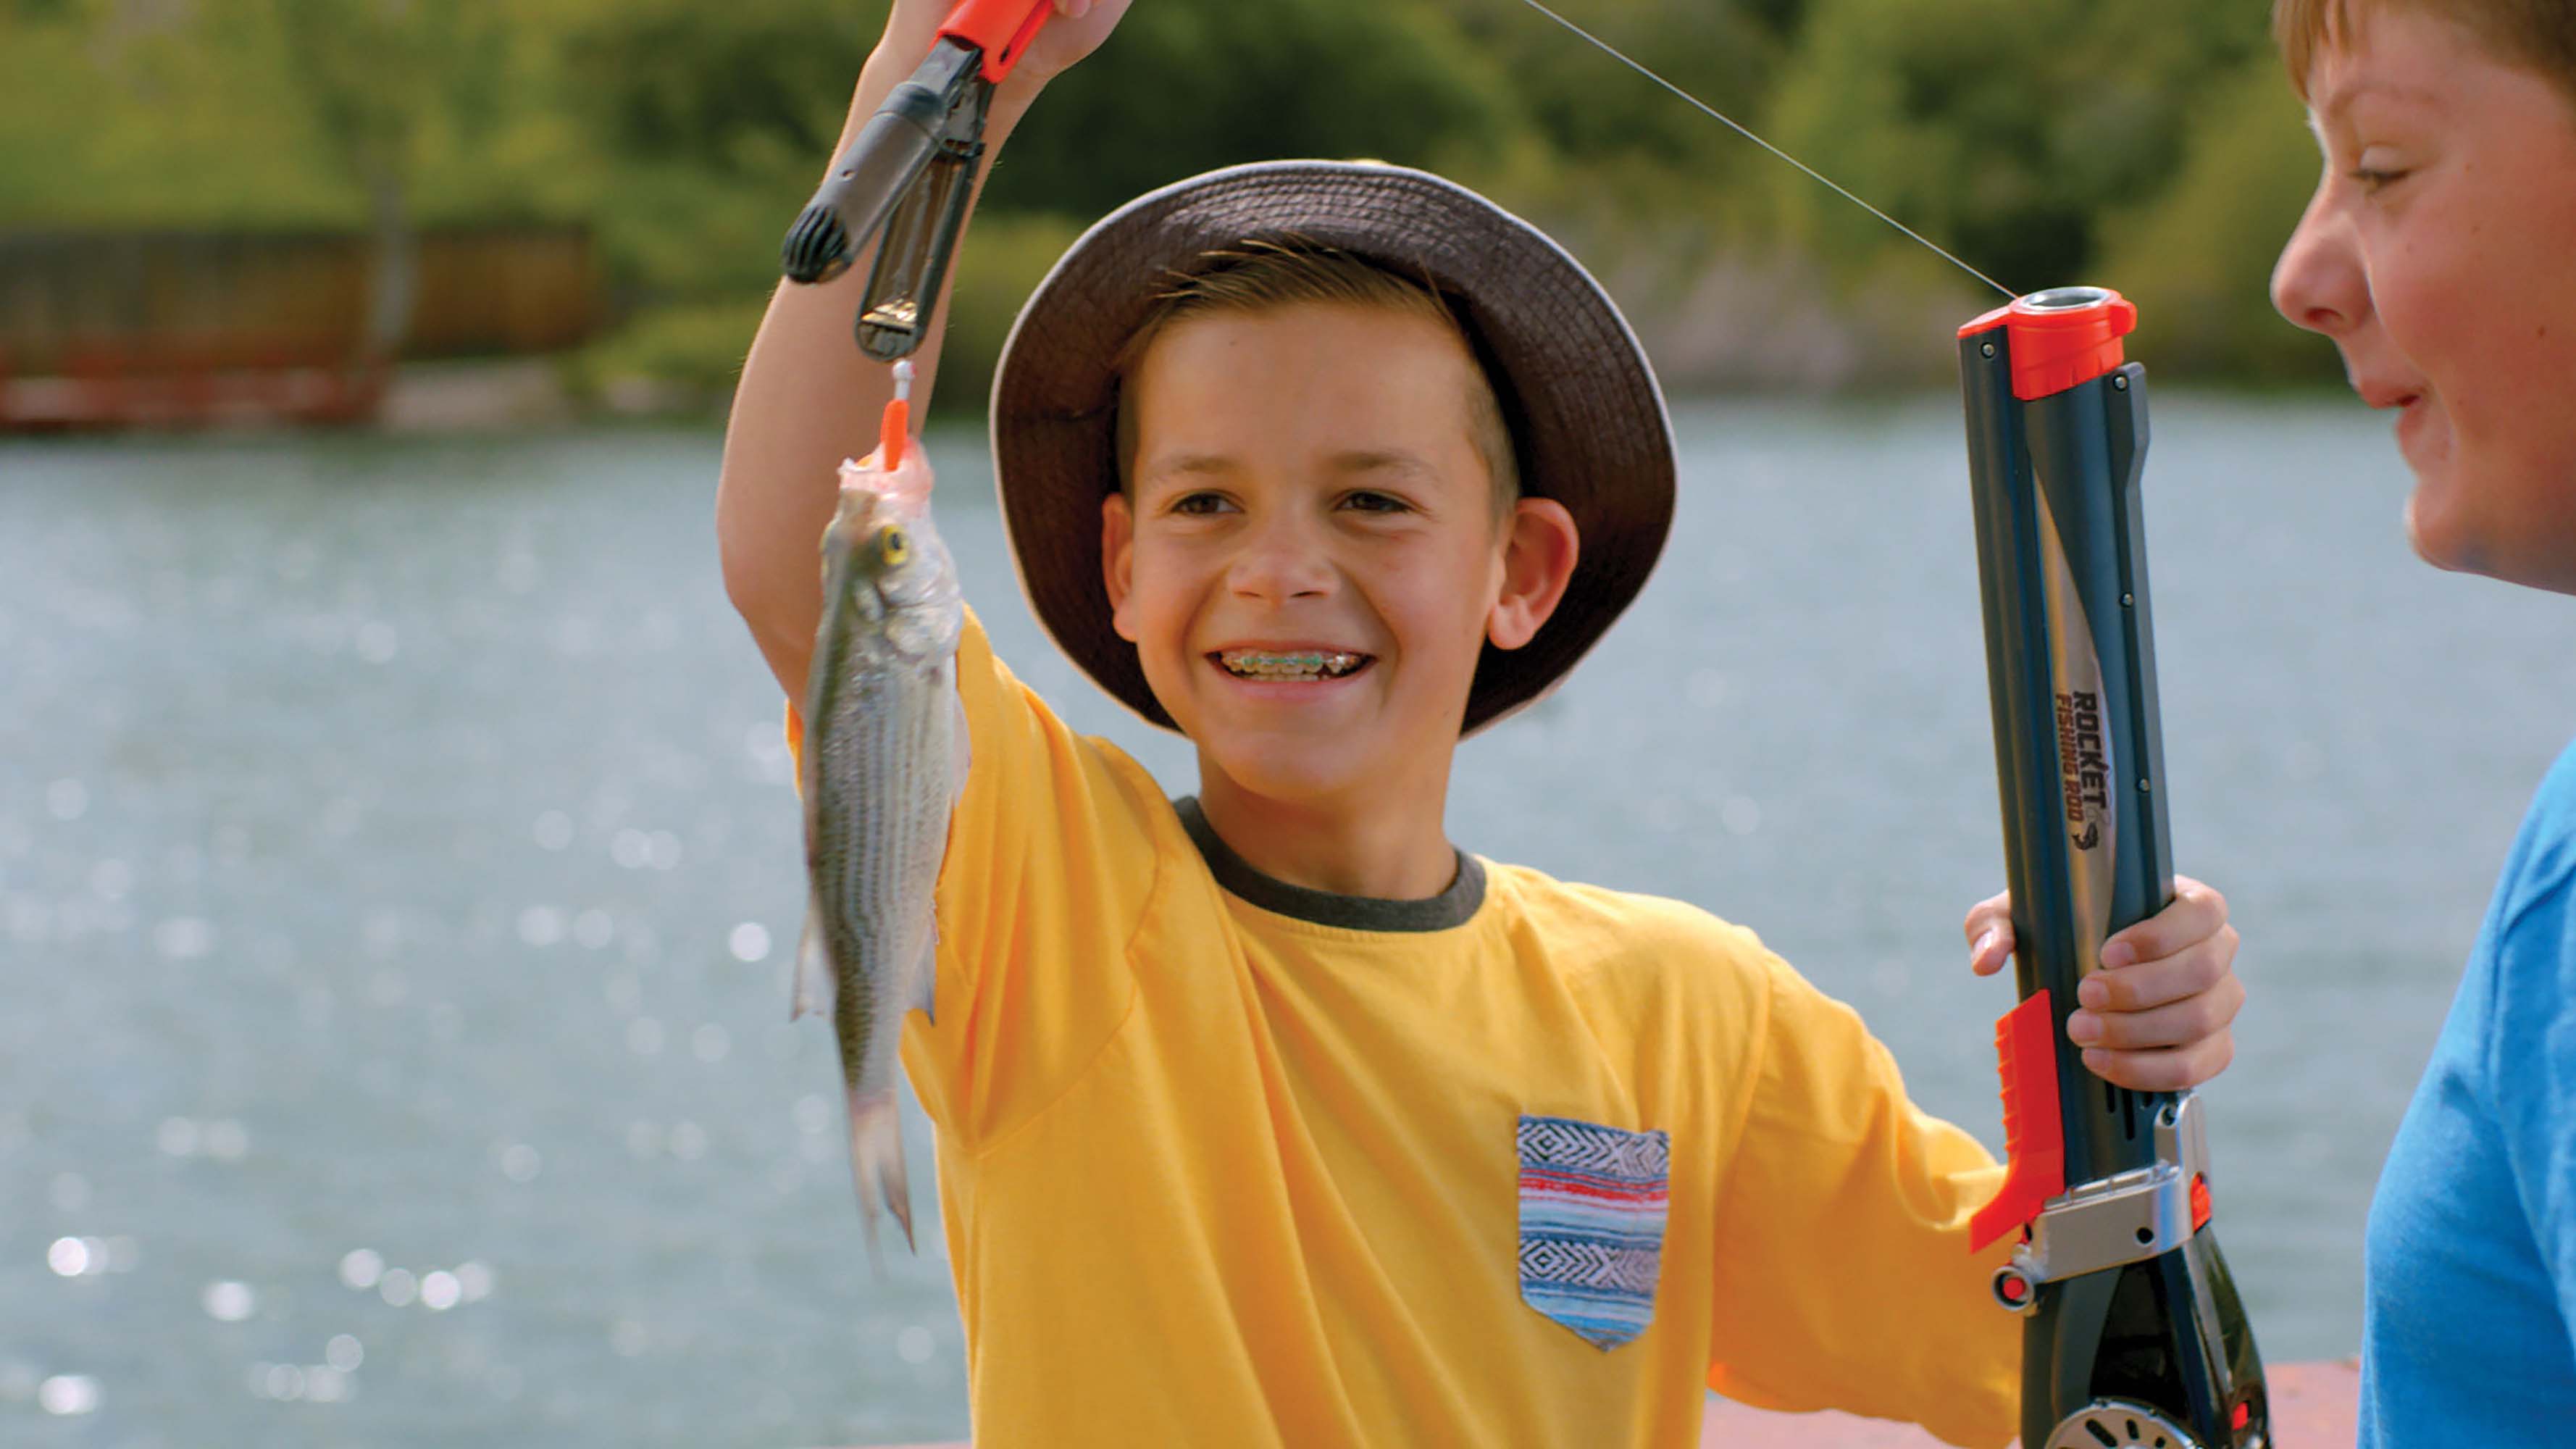 Goliath Rocket Fishing Rod - Ready to Fish Kids Graphite Fishing Pole - No Casting Needed - image 5 of 5